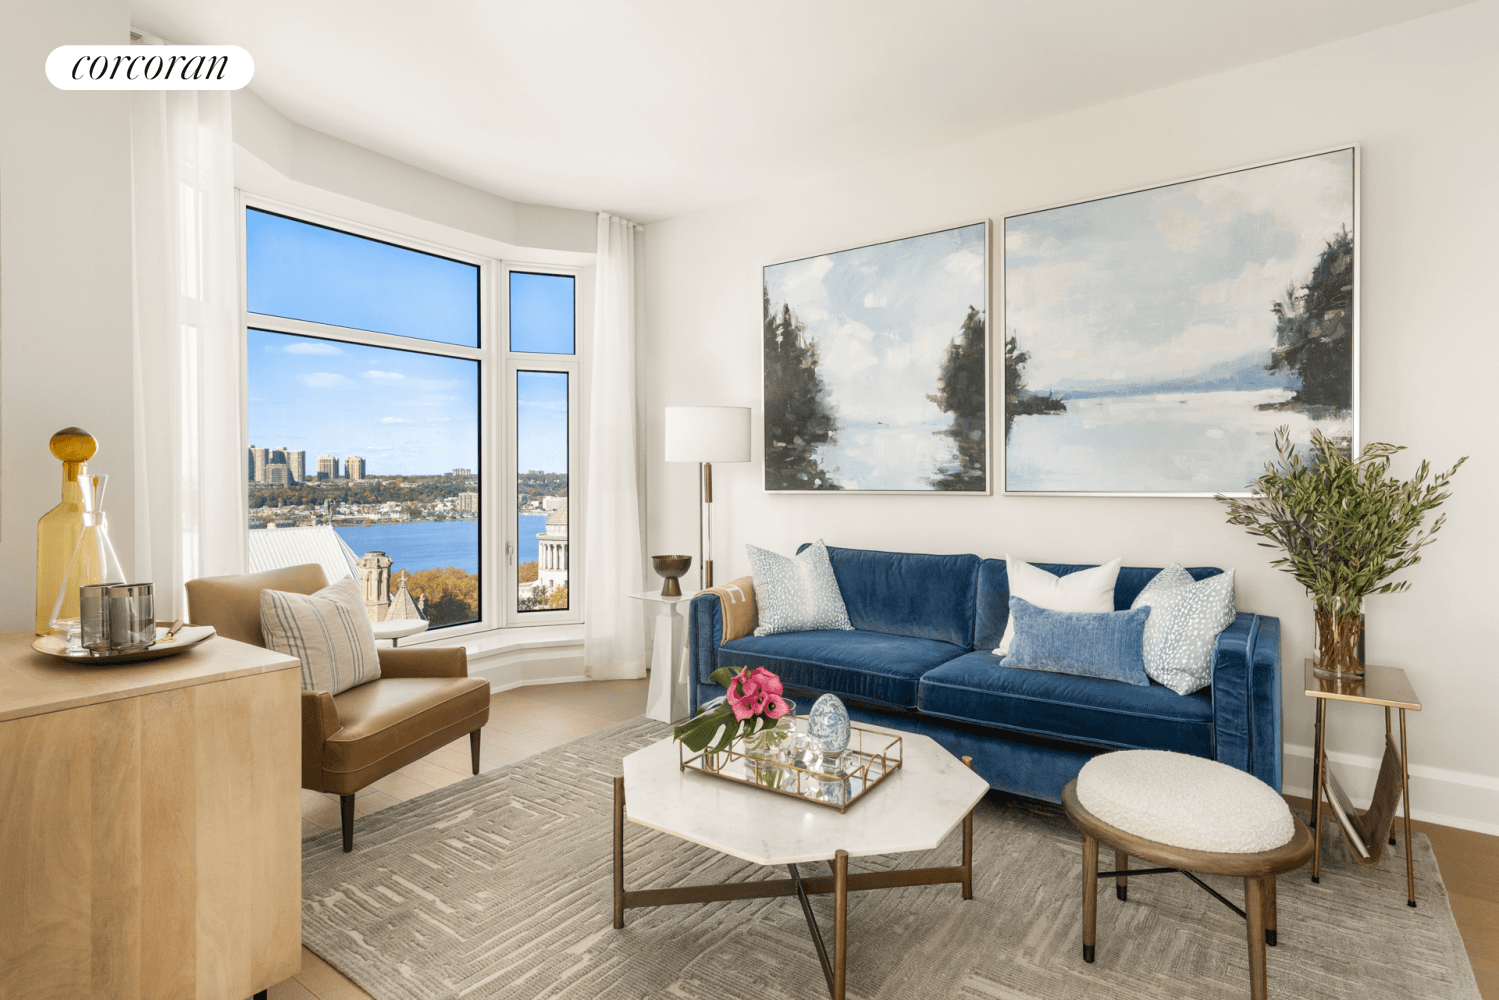 IMMEDIATE OCCUPANCYA charming 807 square foot one bedroom home, Residence 29C enjoys sweeping western views over the iconic spire of Riverside Church, the Hudson River, and the George Washington Bridge.